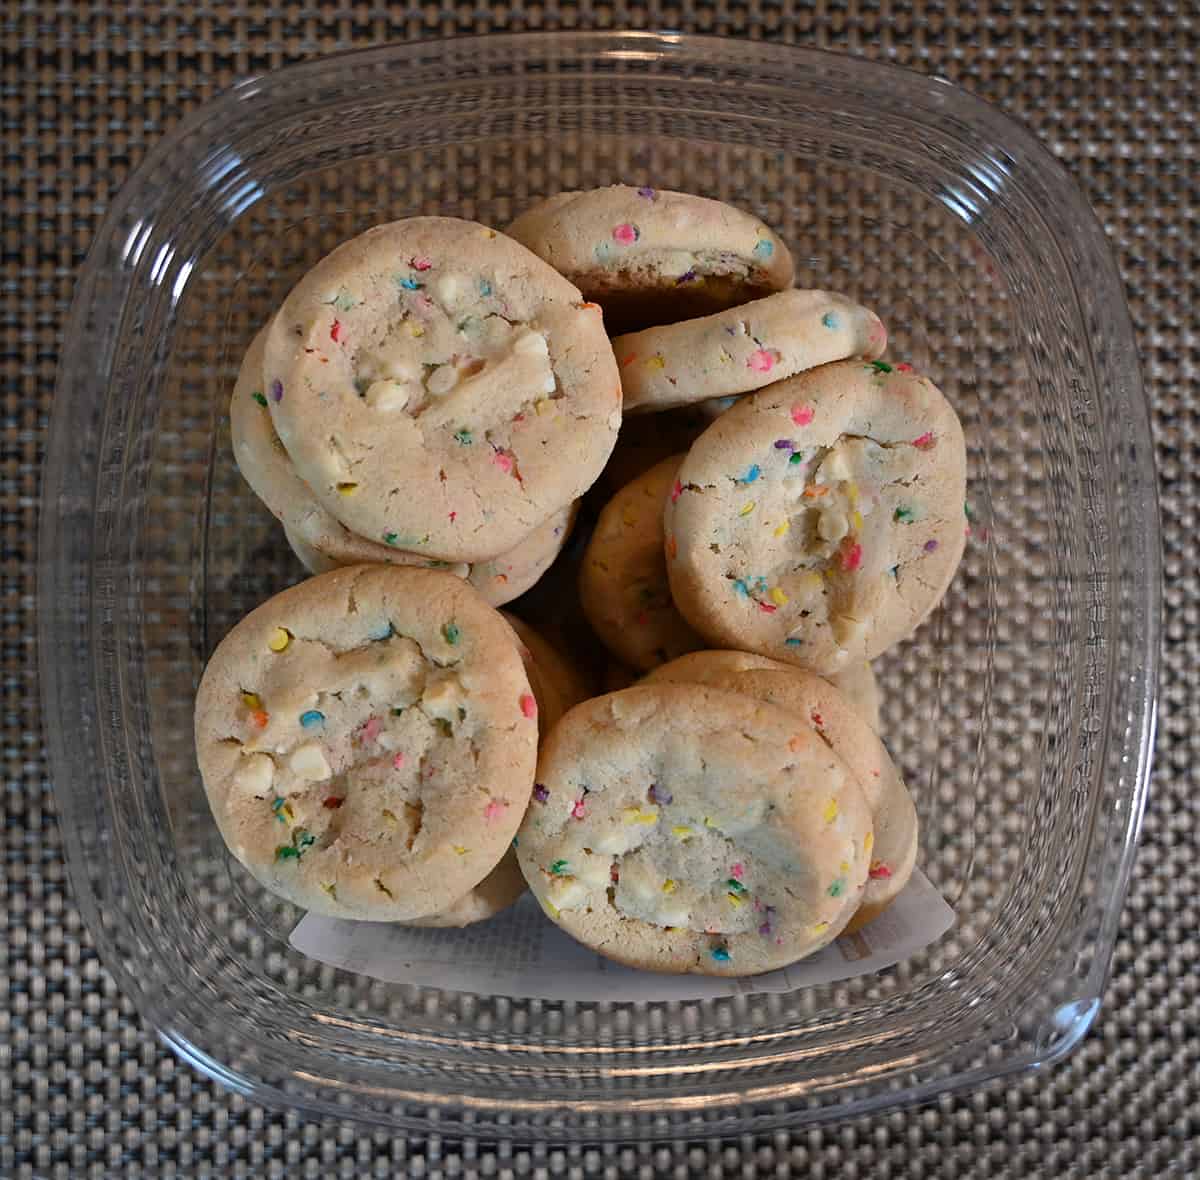 Top down image of an open container of confetti cookies so you can see the cookies inside.